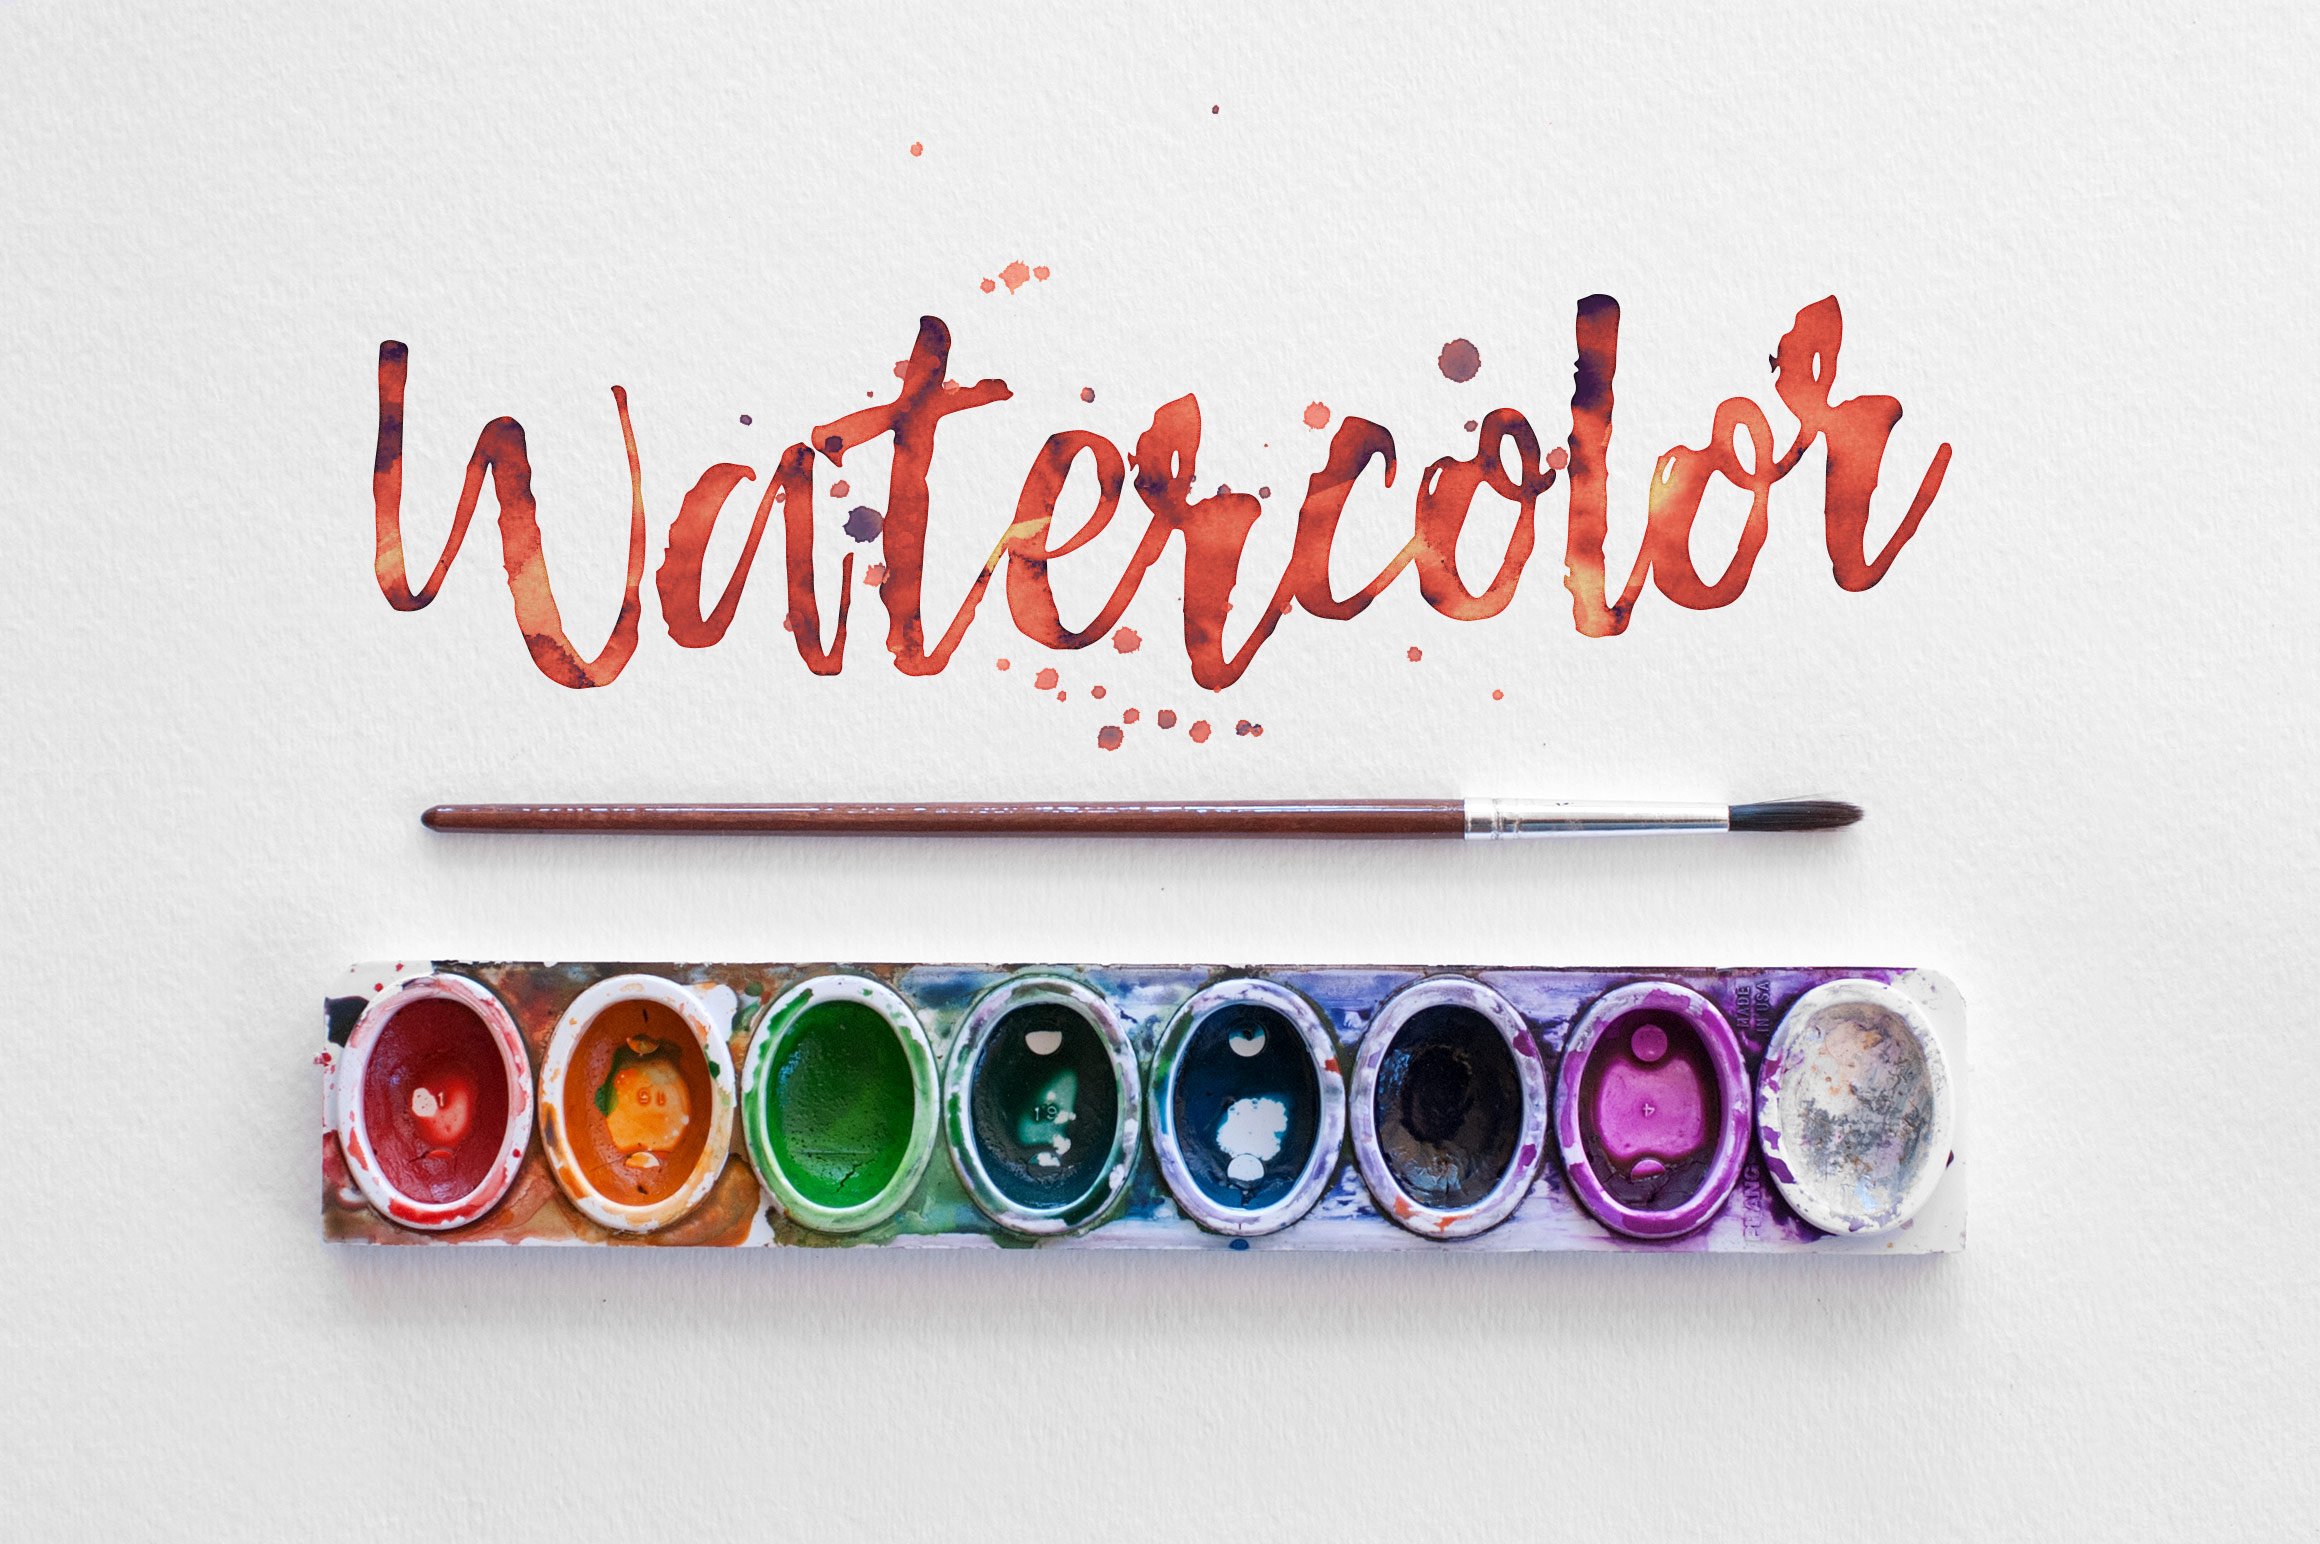 The Ultimate Watercolor Collectioncover image.